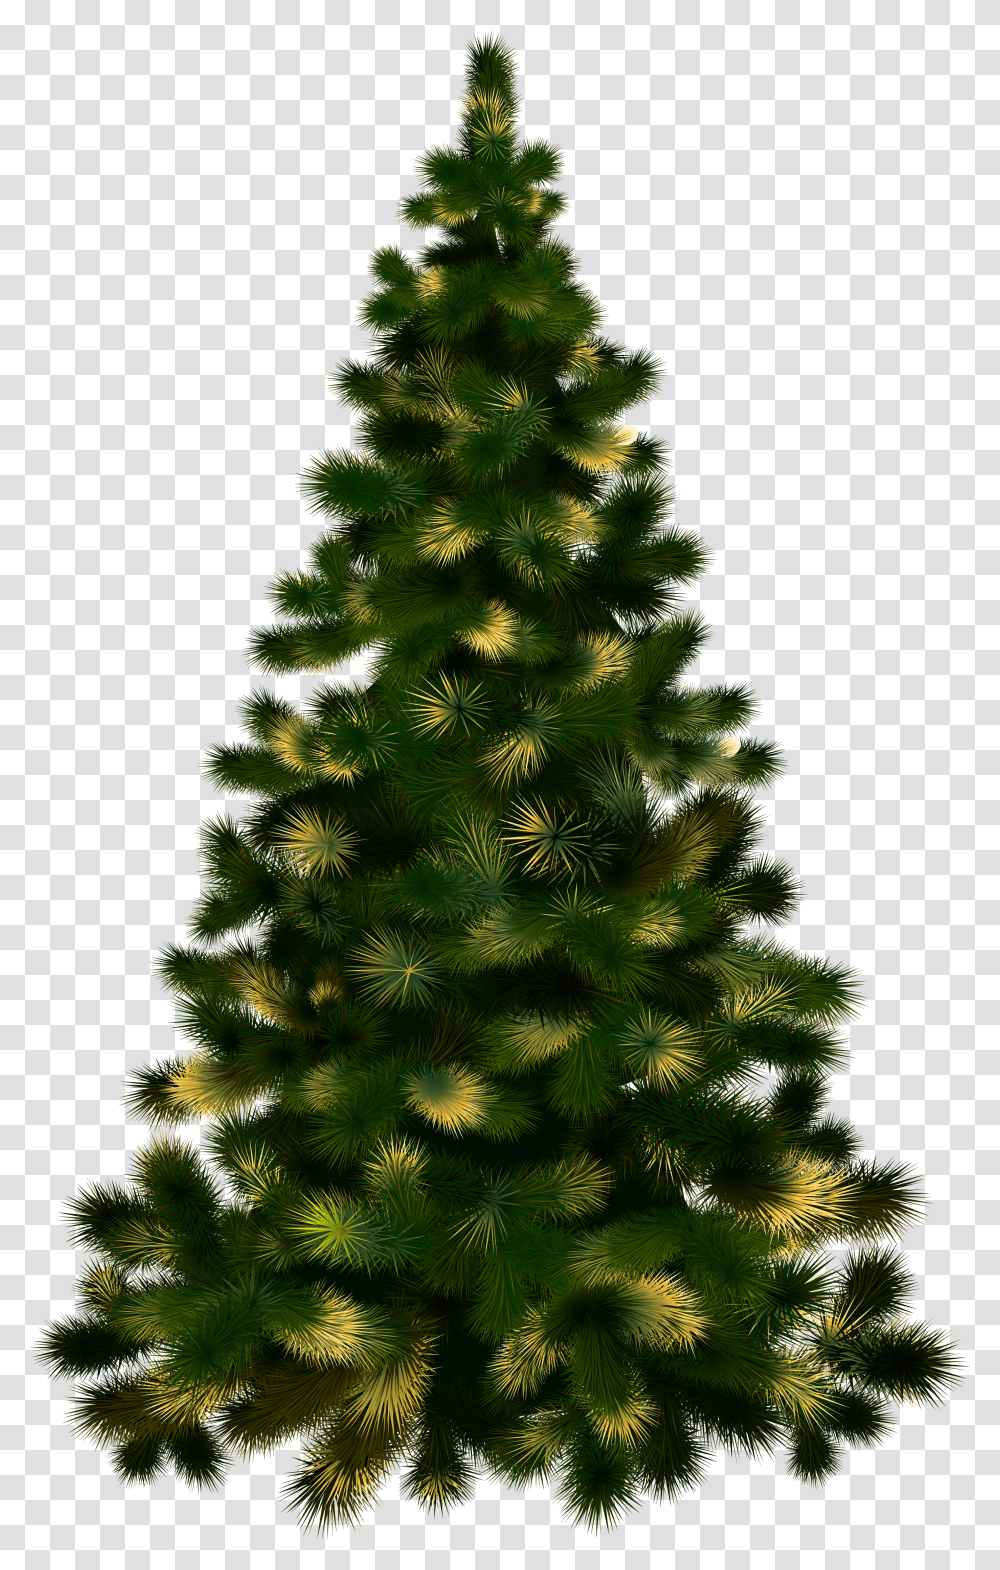 Christmas Tree Without Lights Image Purepng Free Christmas Tree Real Transparent Png